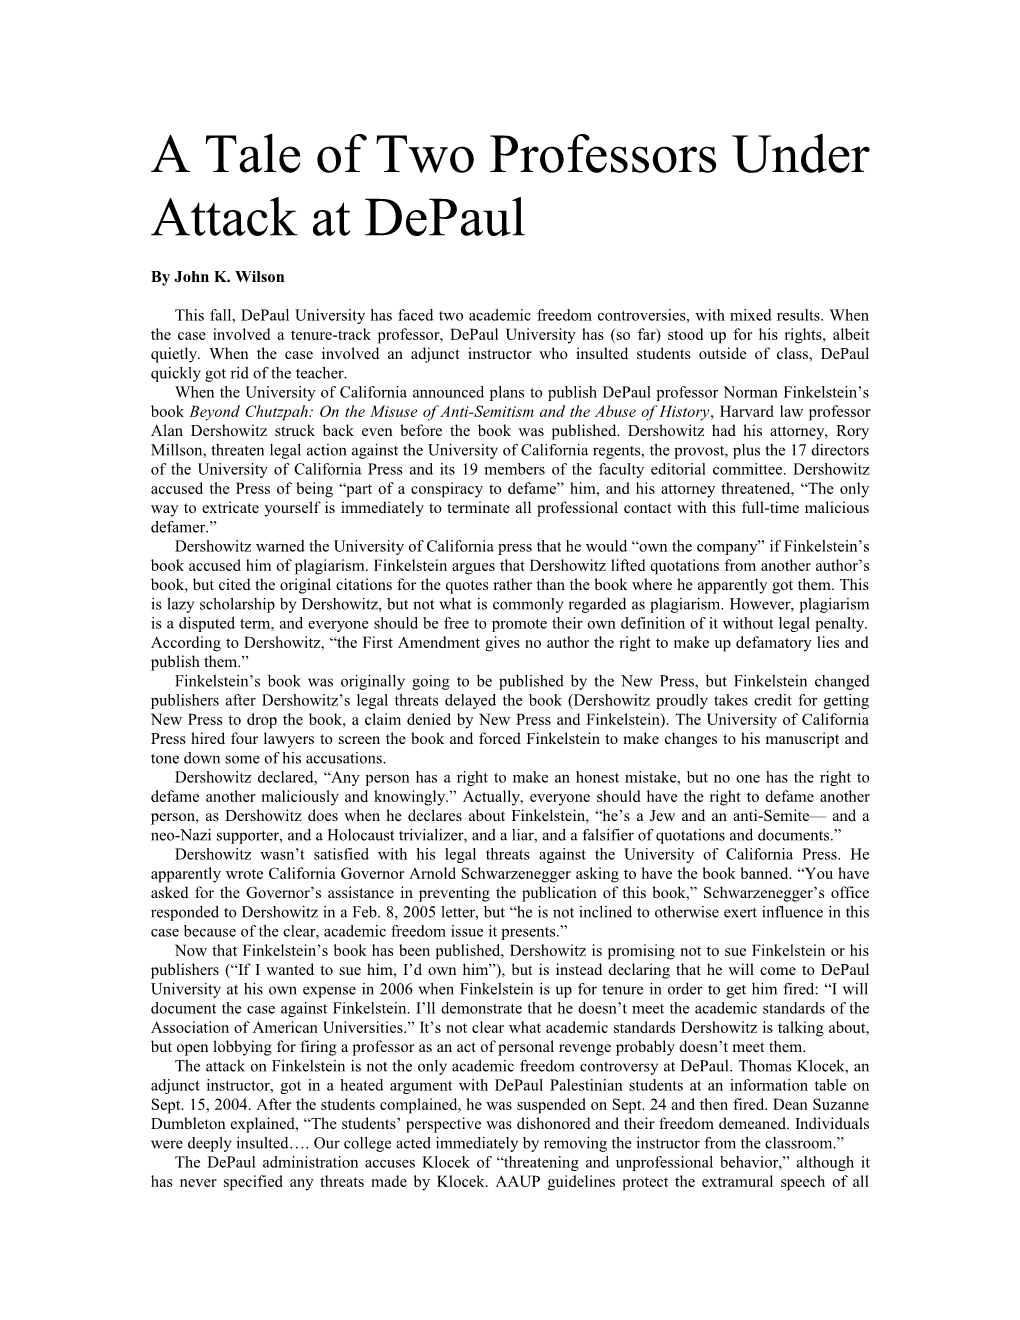 A Tale of Two Professors Under Attack at Depaul